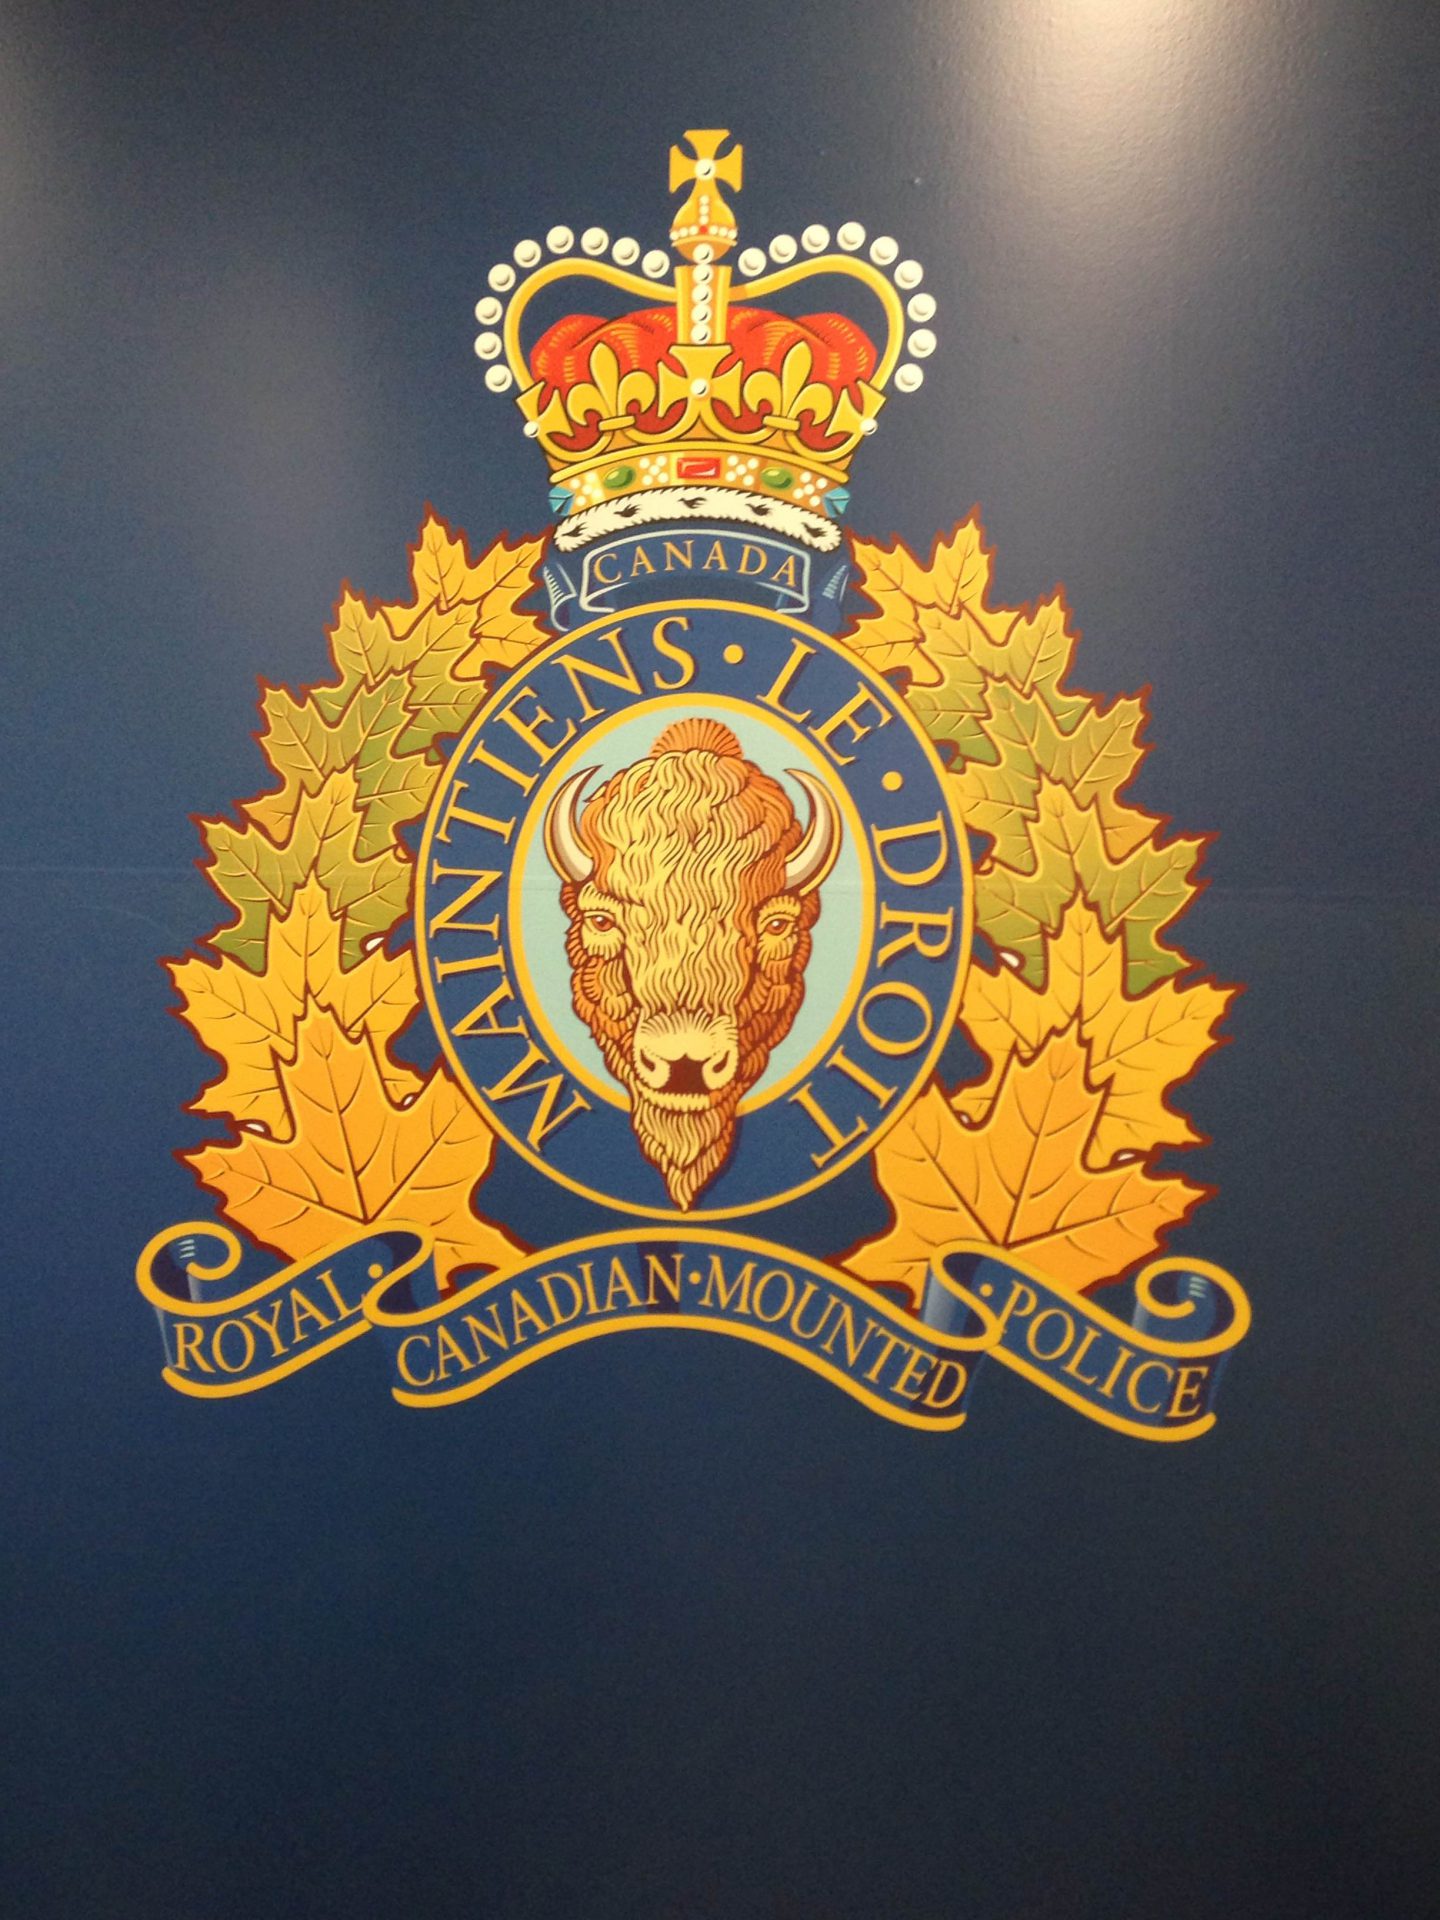 Man charged for police vehicle vandalism